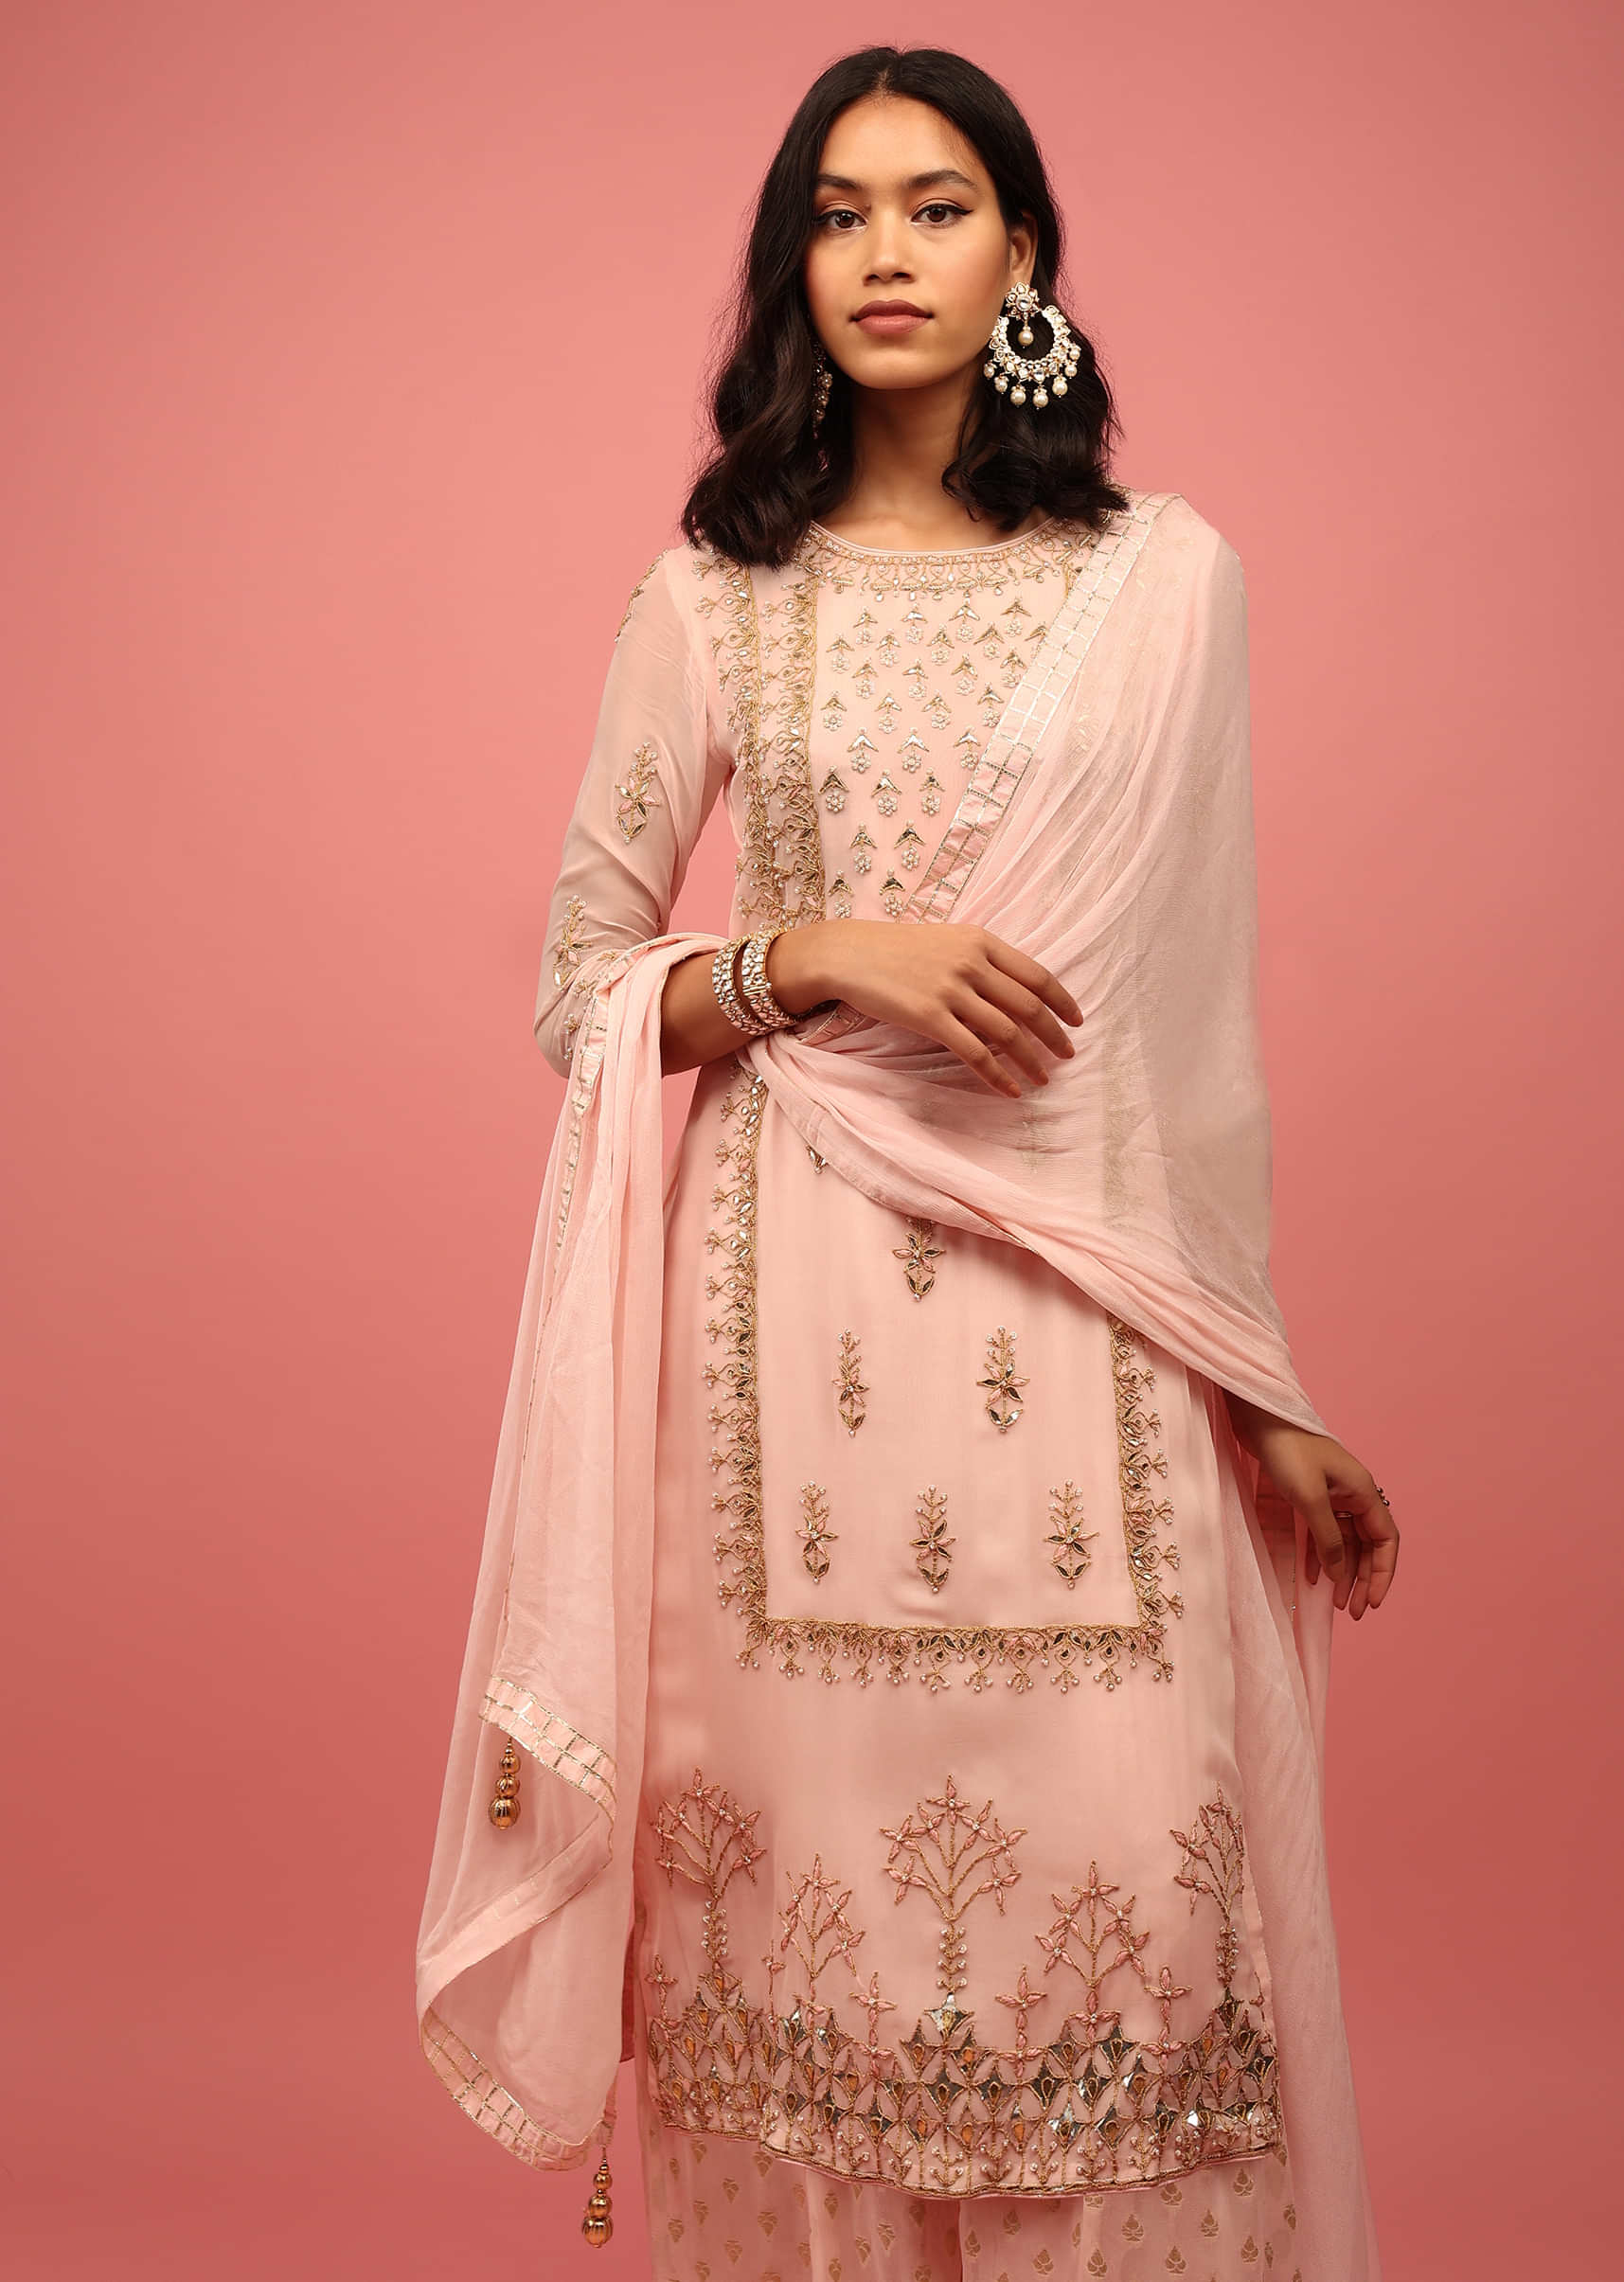 Pastel Peach Palazzo Suit Fully-Handcrafted In Banarasi Georgette With Embroidery